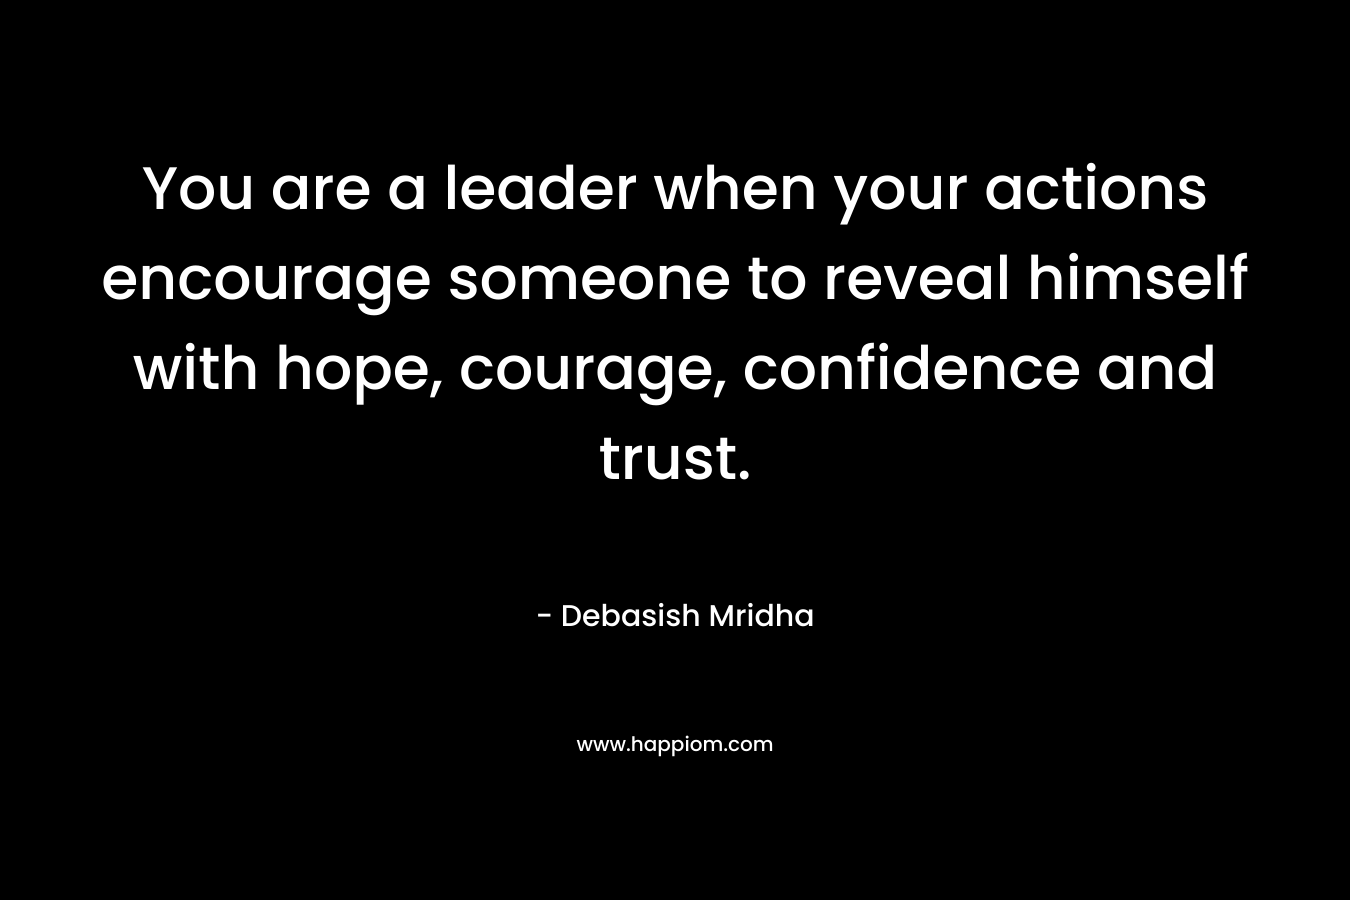 You are a leader when your actions encourage someone to reveal himself with hope, courage, confidence and trust.